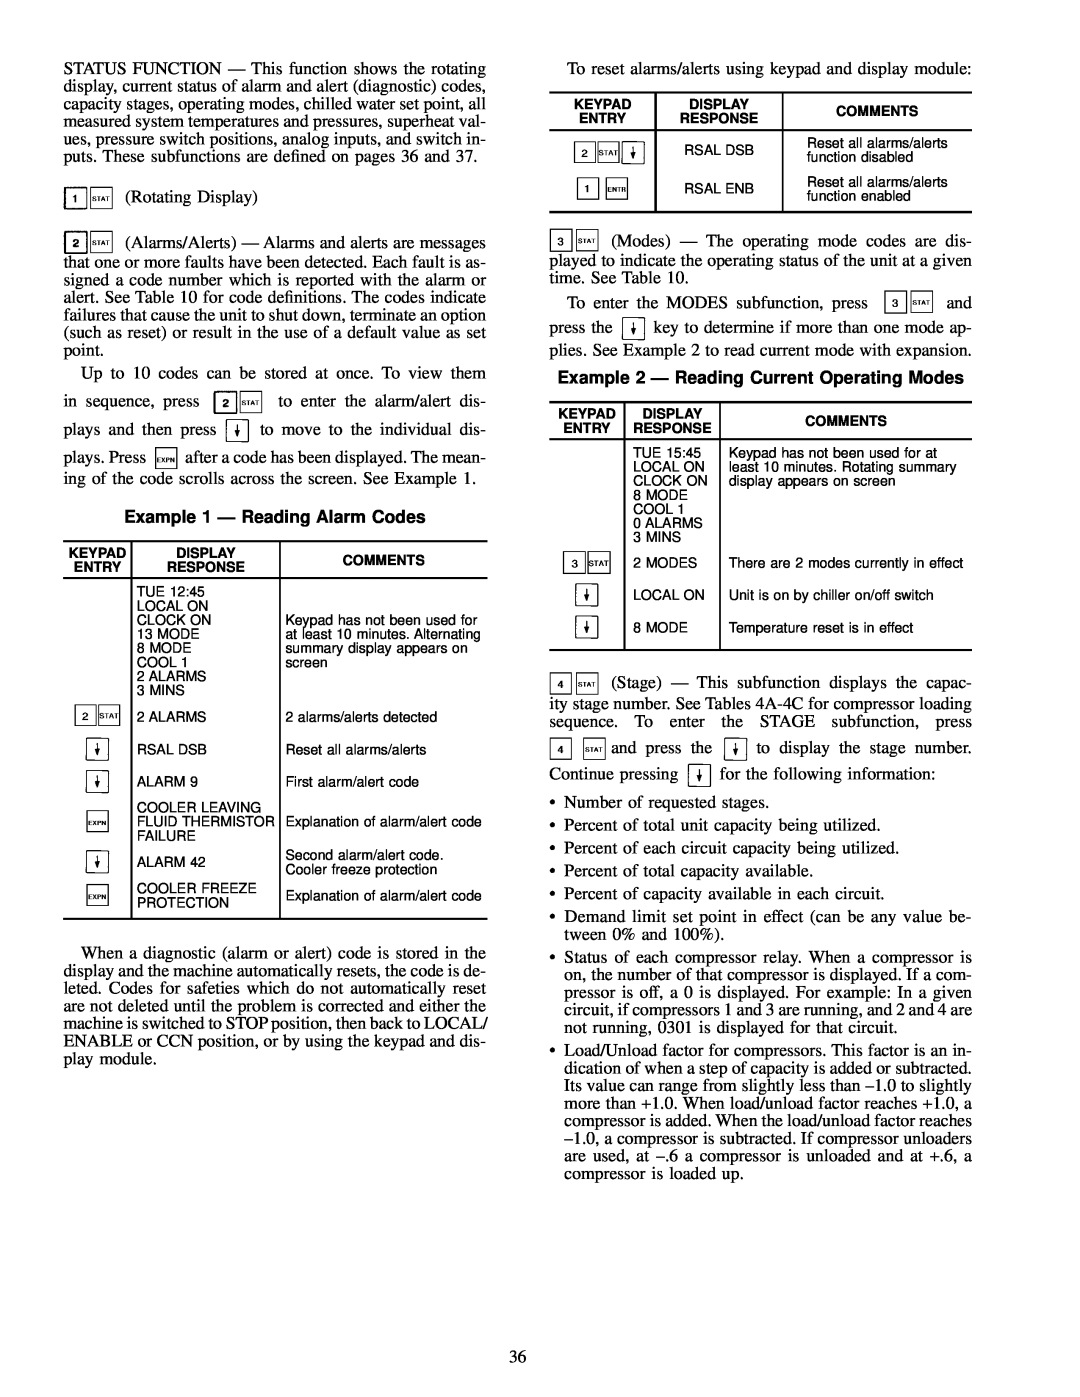 Carrier 30GN040-420 operating instructions Example 1 Ð Reading Alarm Codes, Example 2 Ð Reading Current Operating Modes 